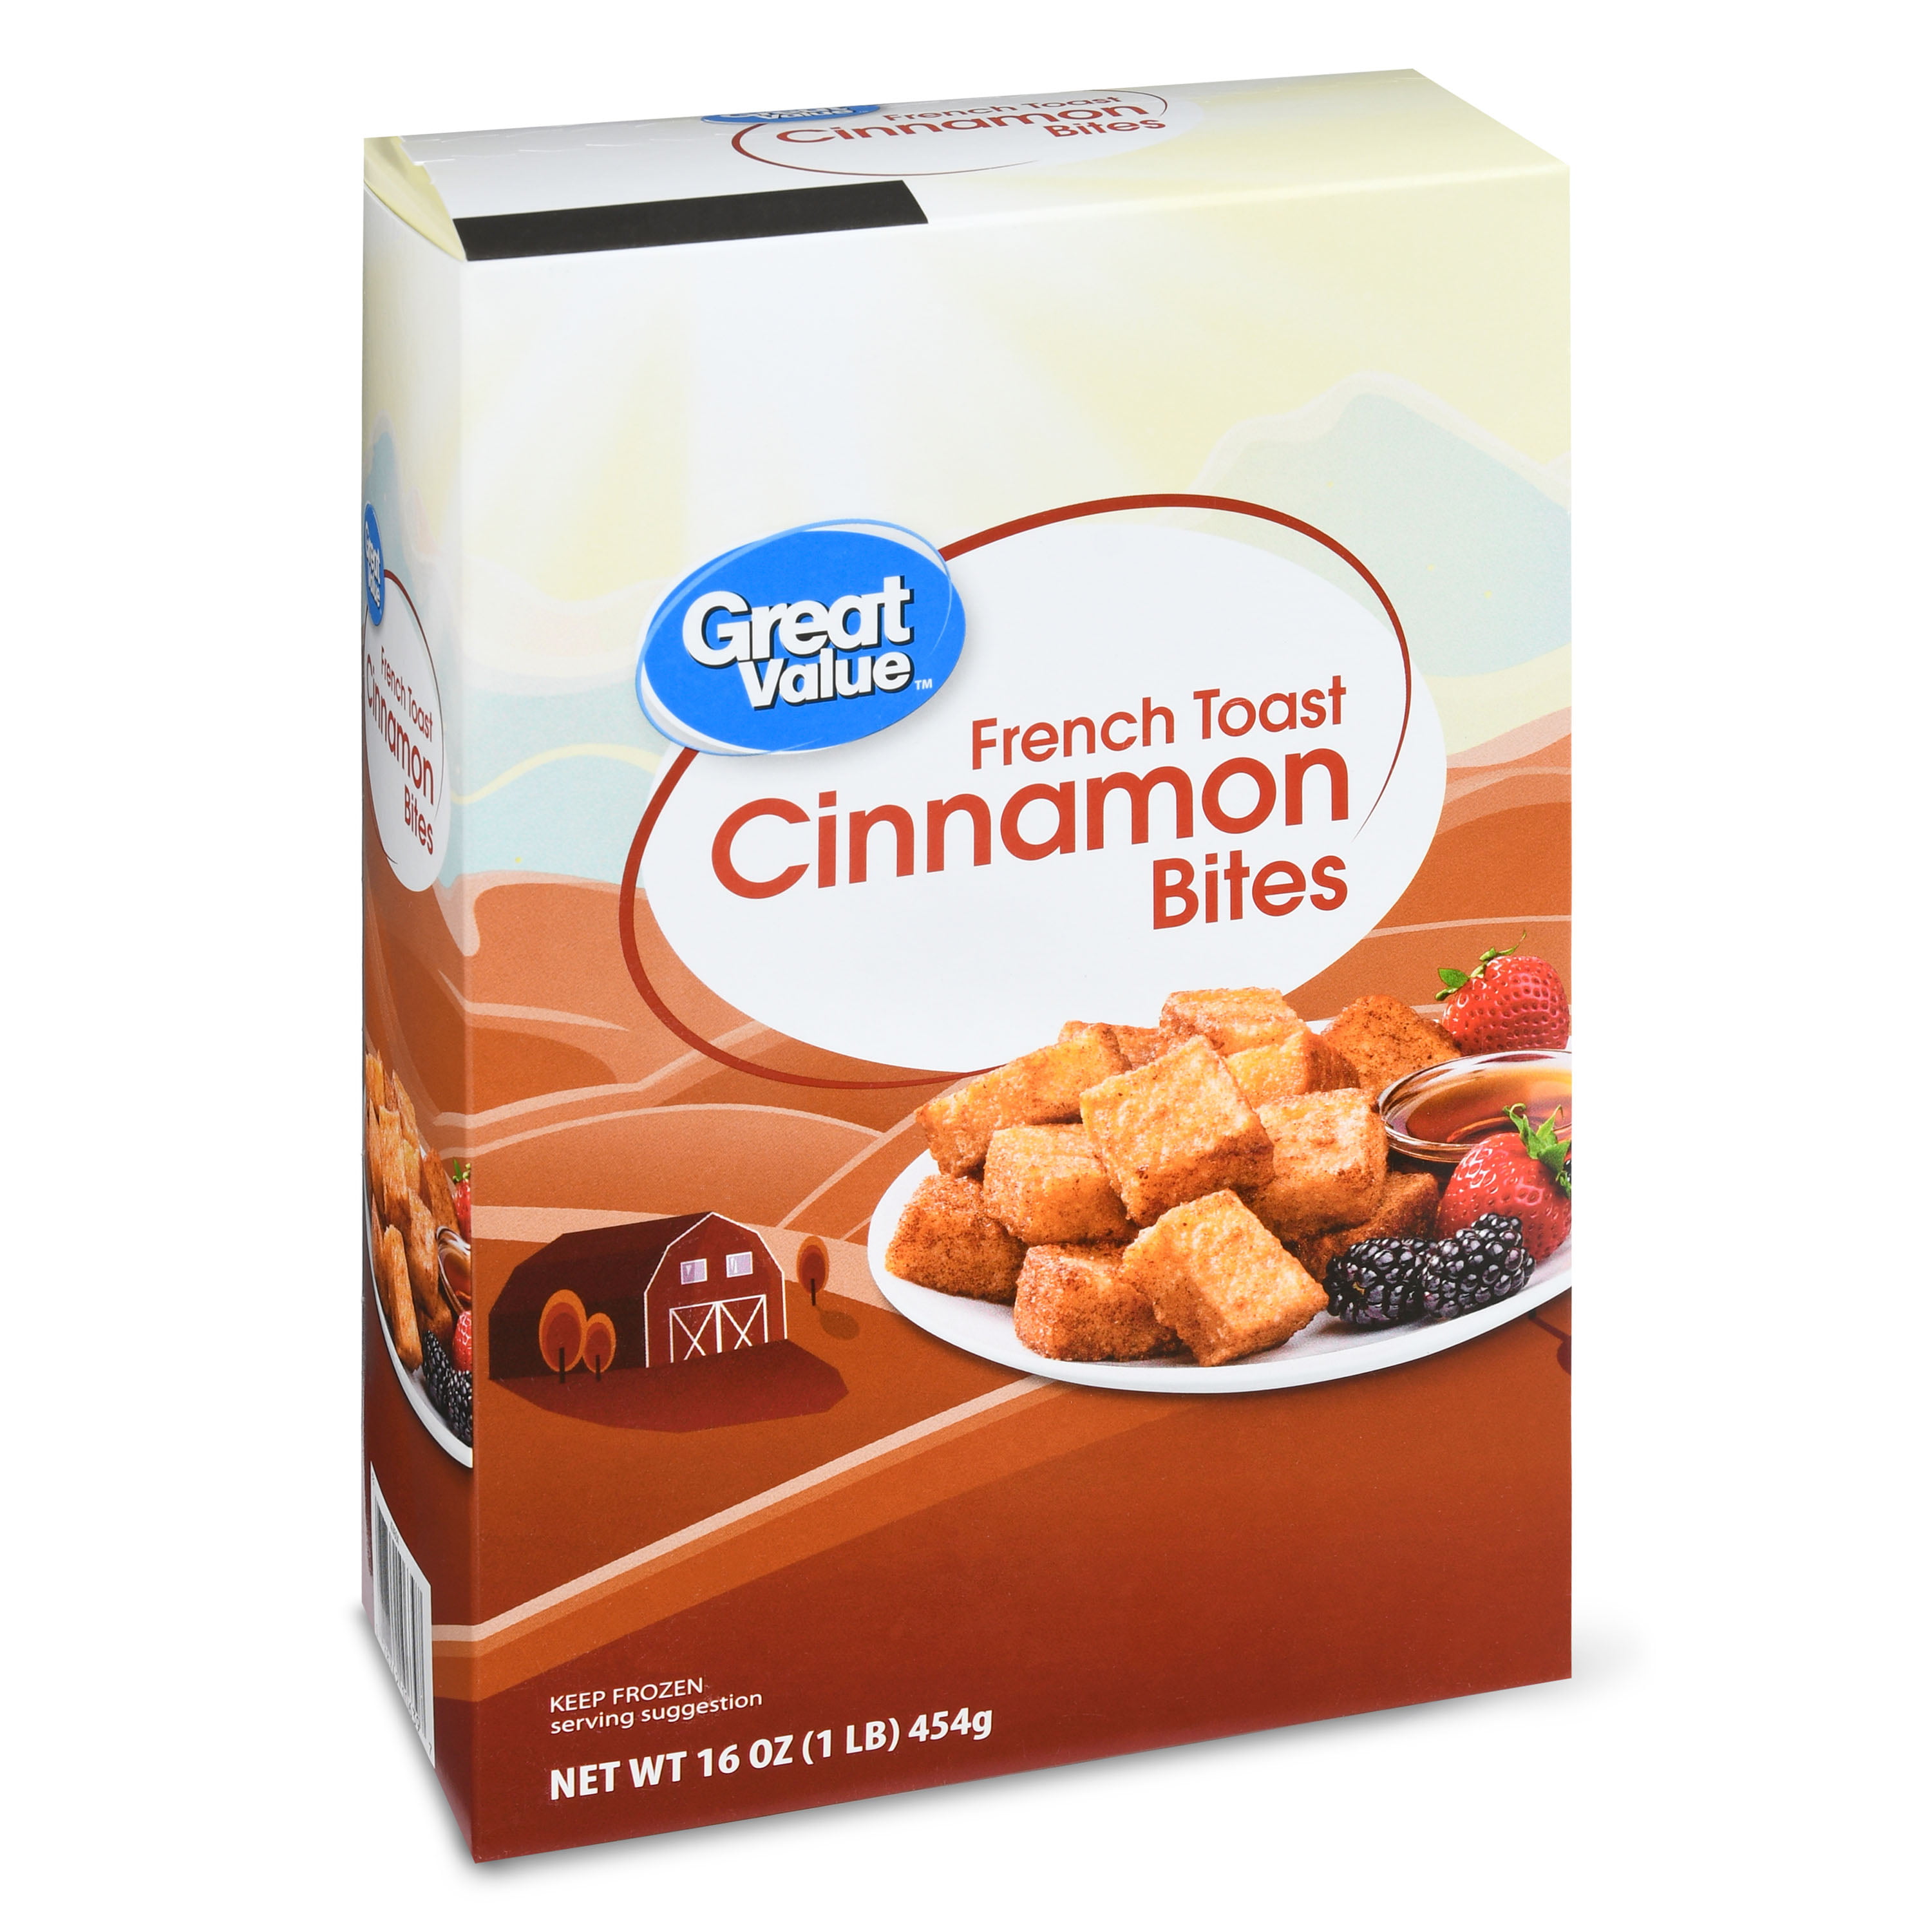 Great Value Cinnamon French Toast Bites, 16 Oz, 60 Ct (Frozen